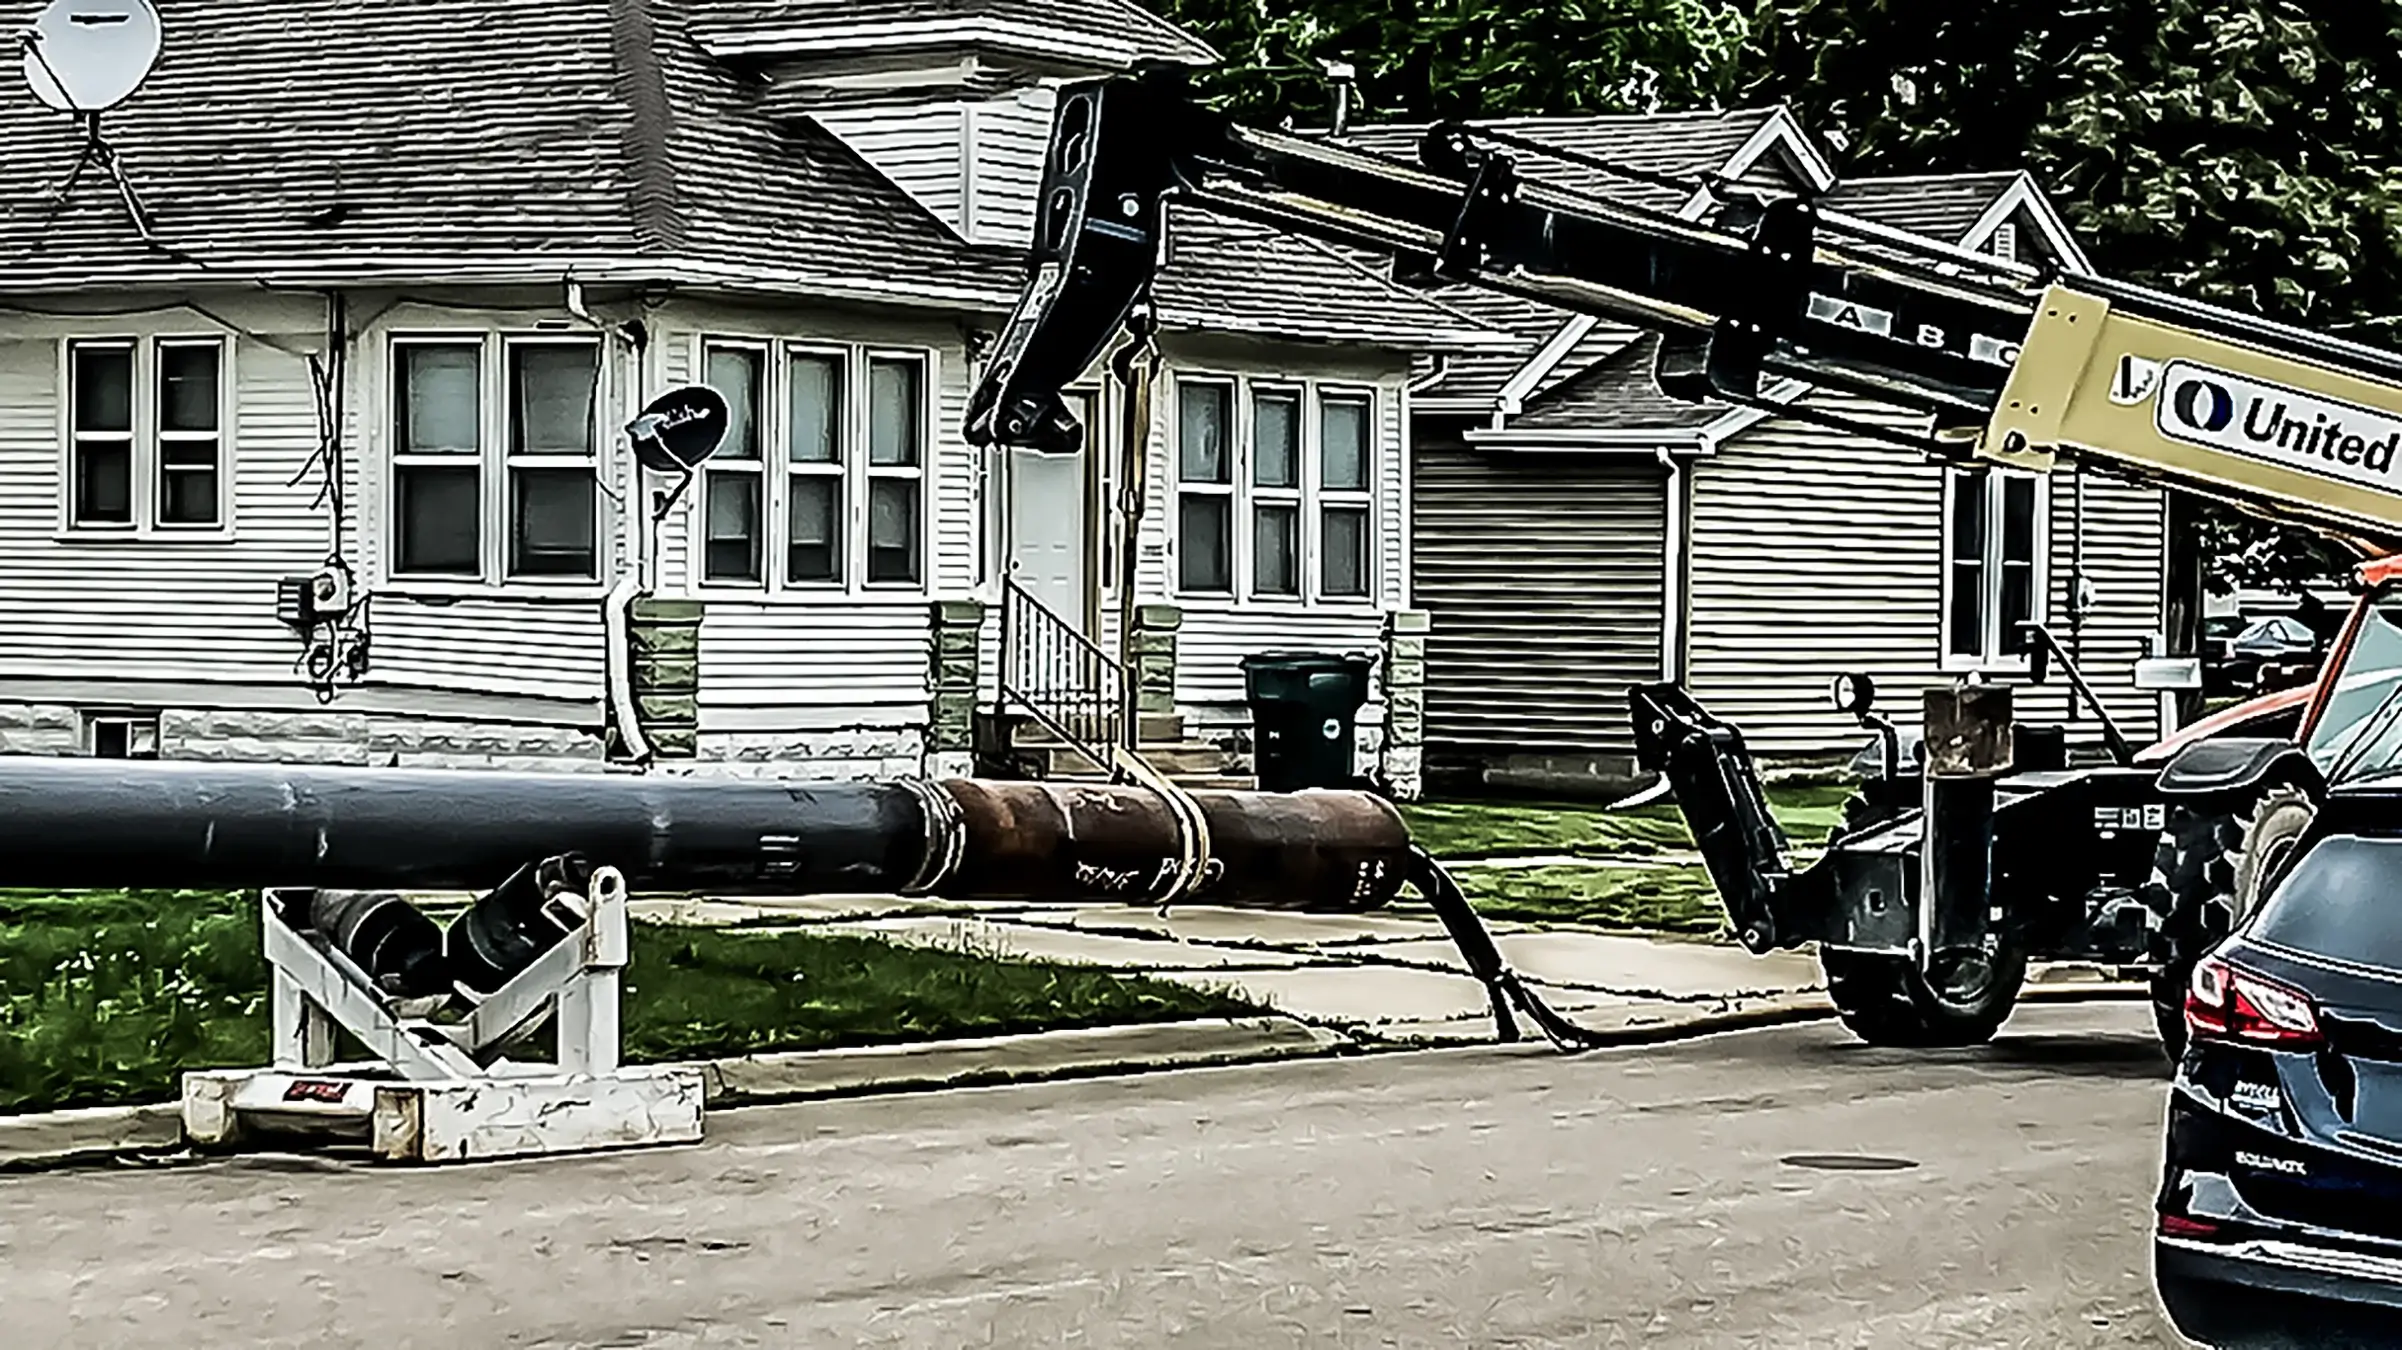 A pipeline being prepared in a residential area